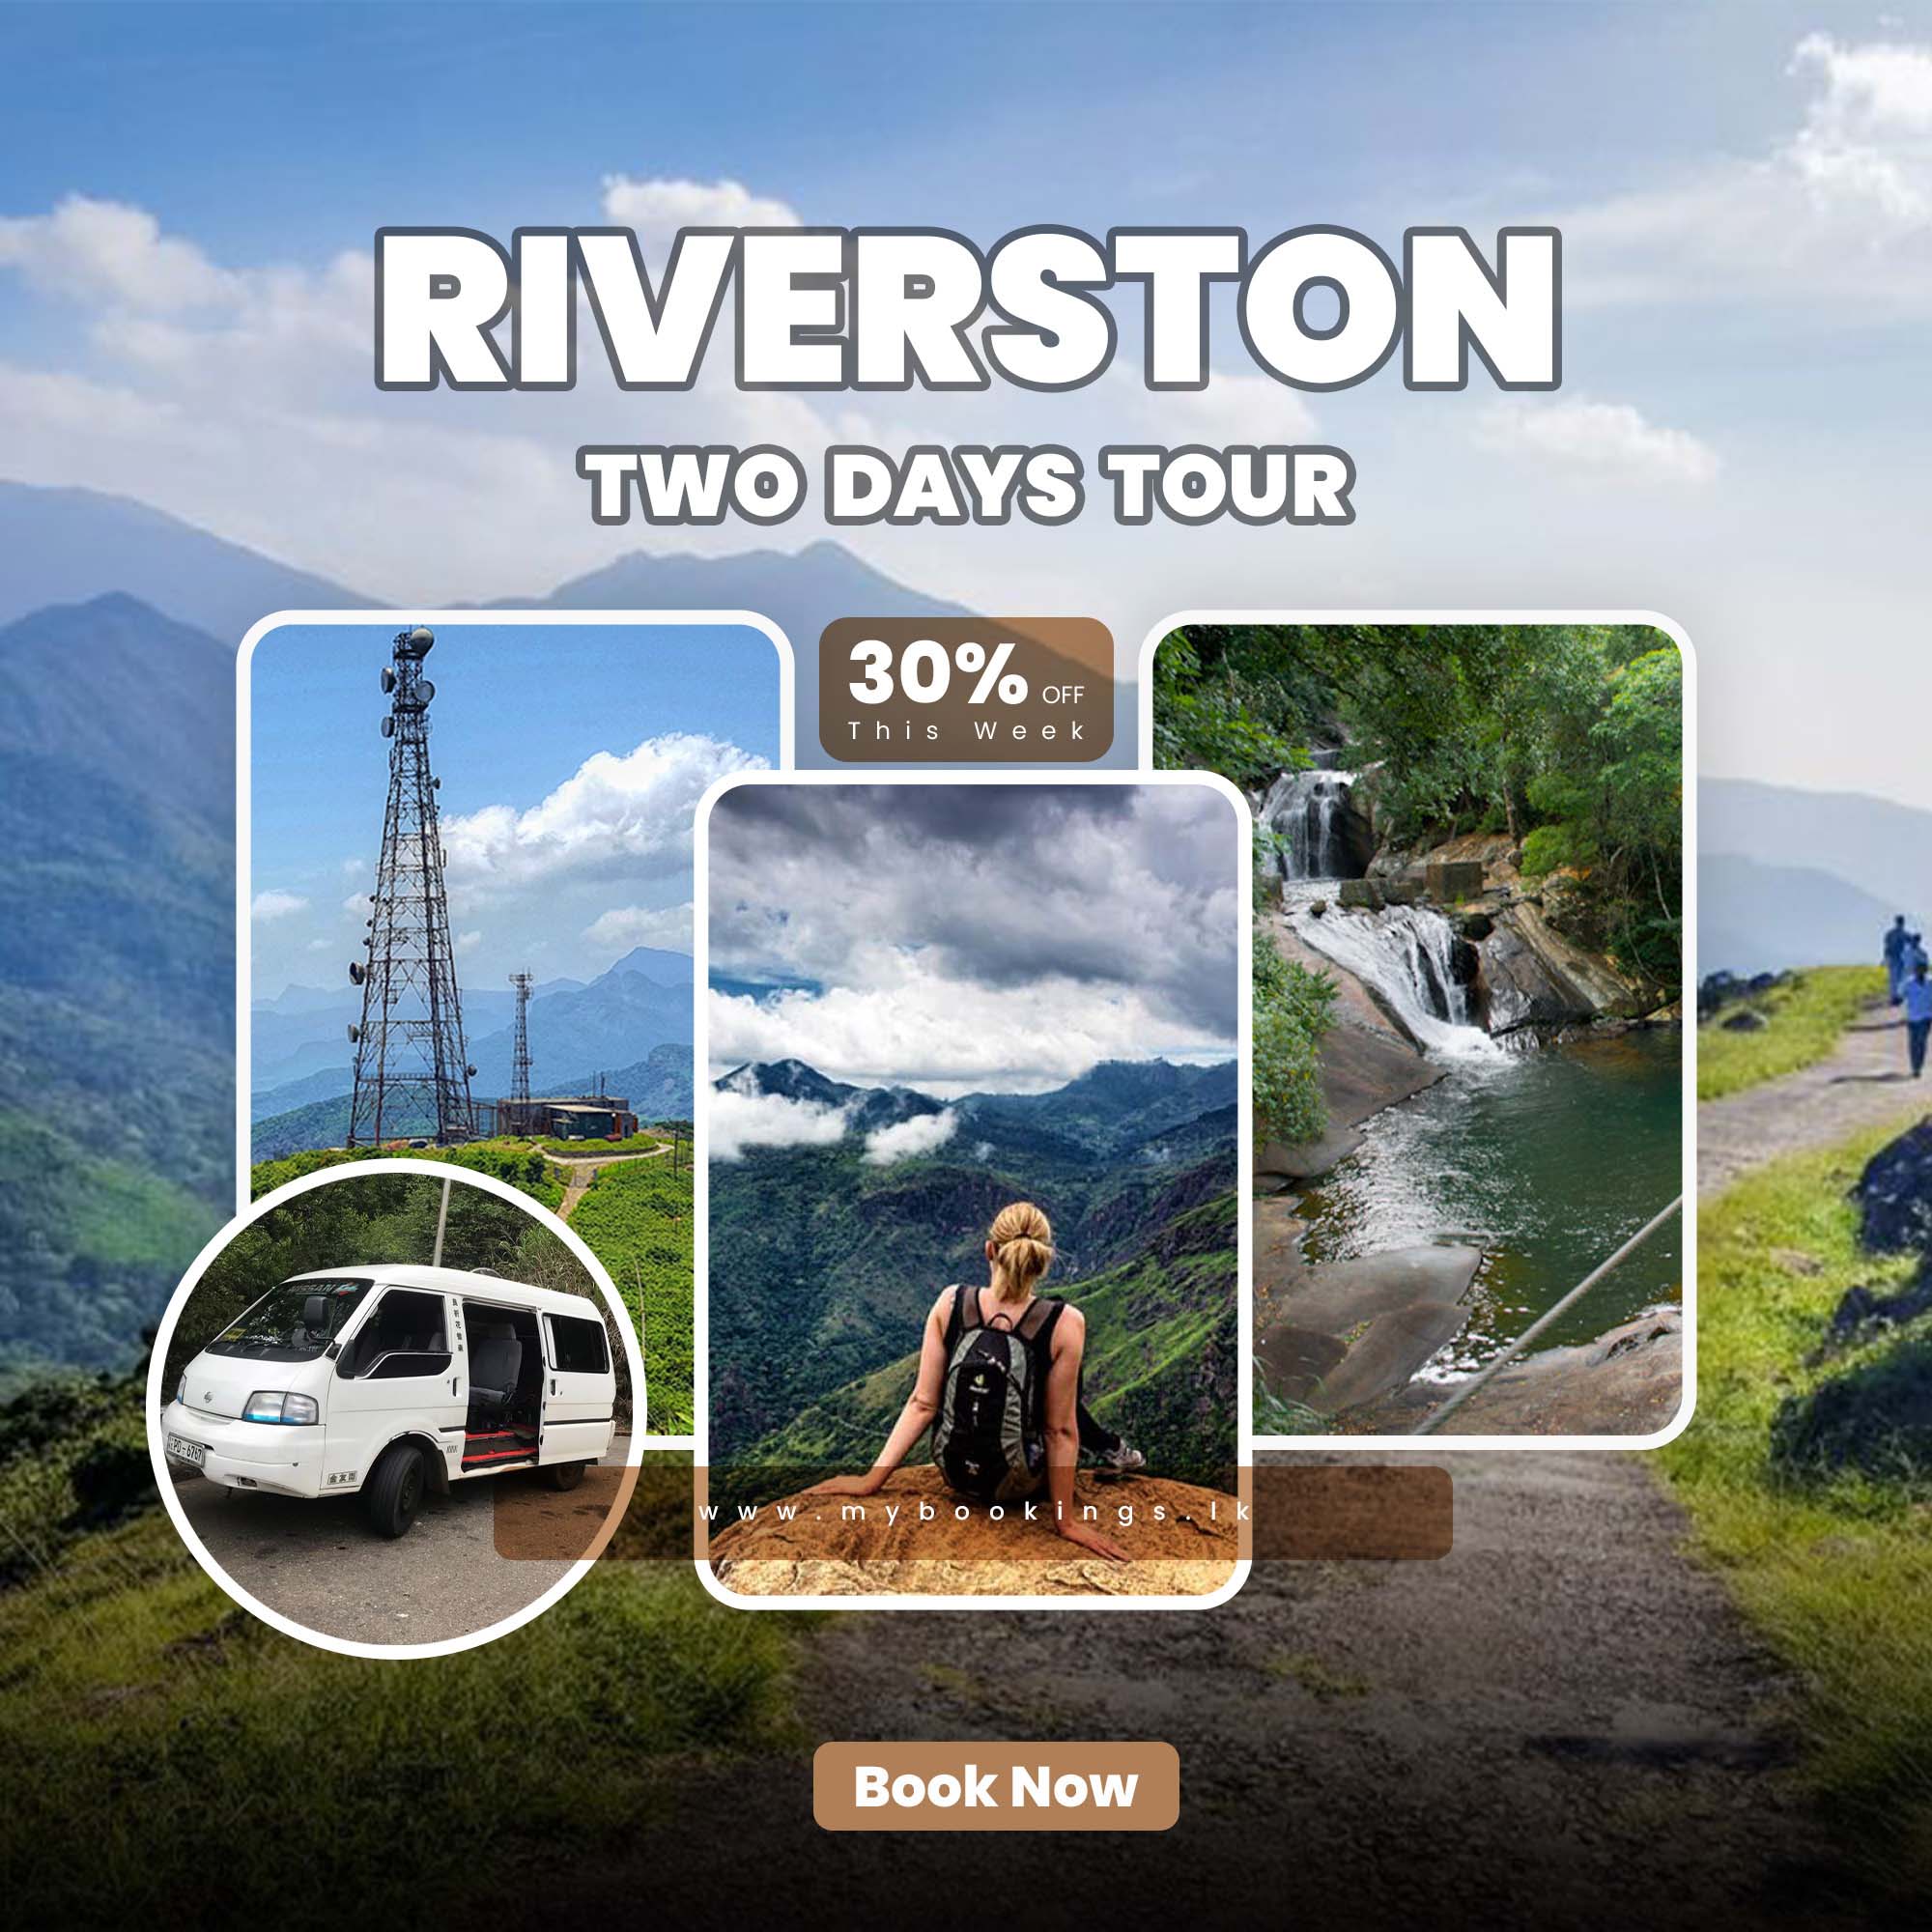 Matale To Riverston Two Days With Accommodation